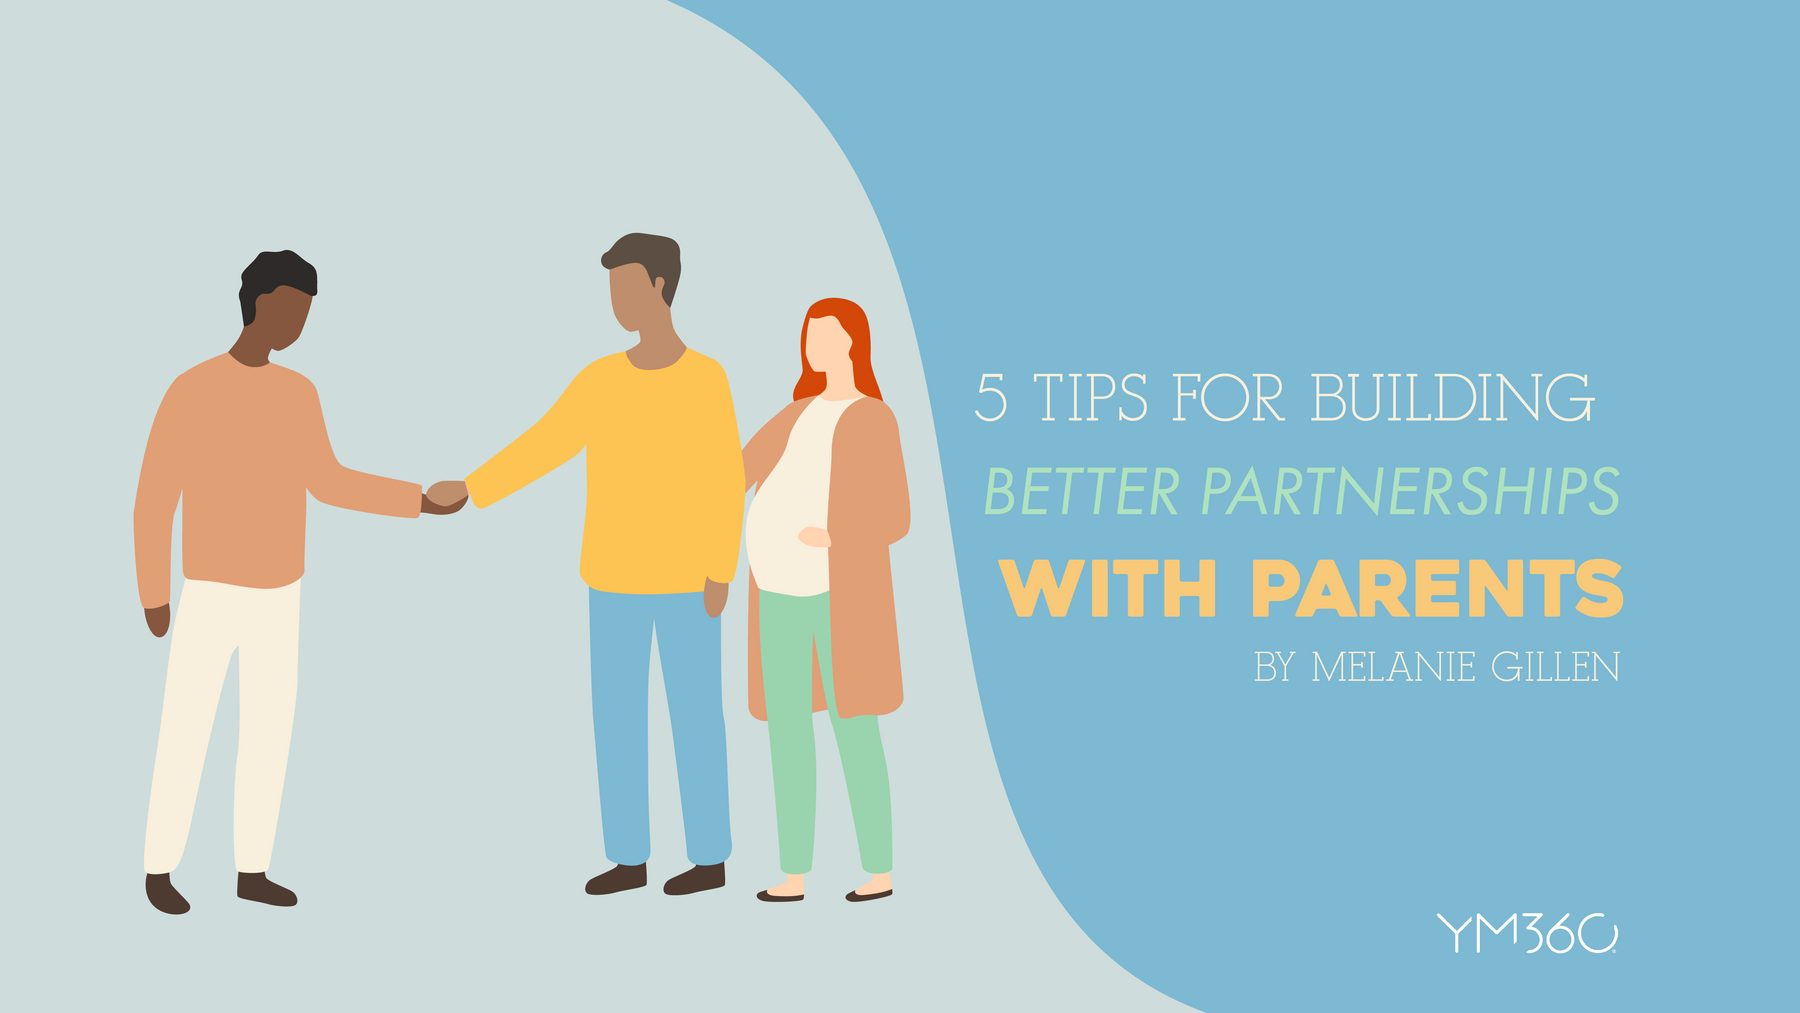 5 Tips for Building Better Partnerships with Parents